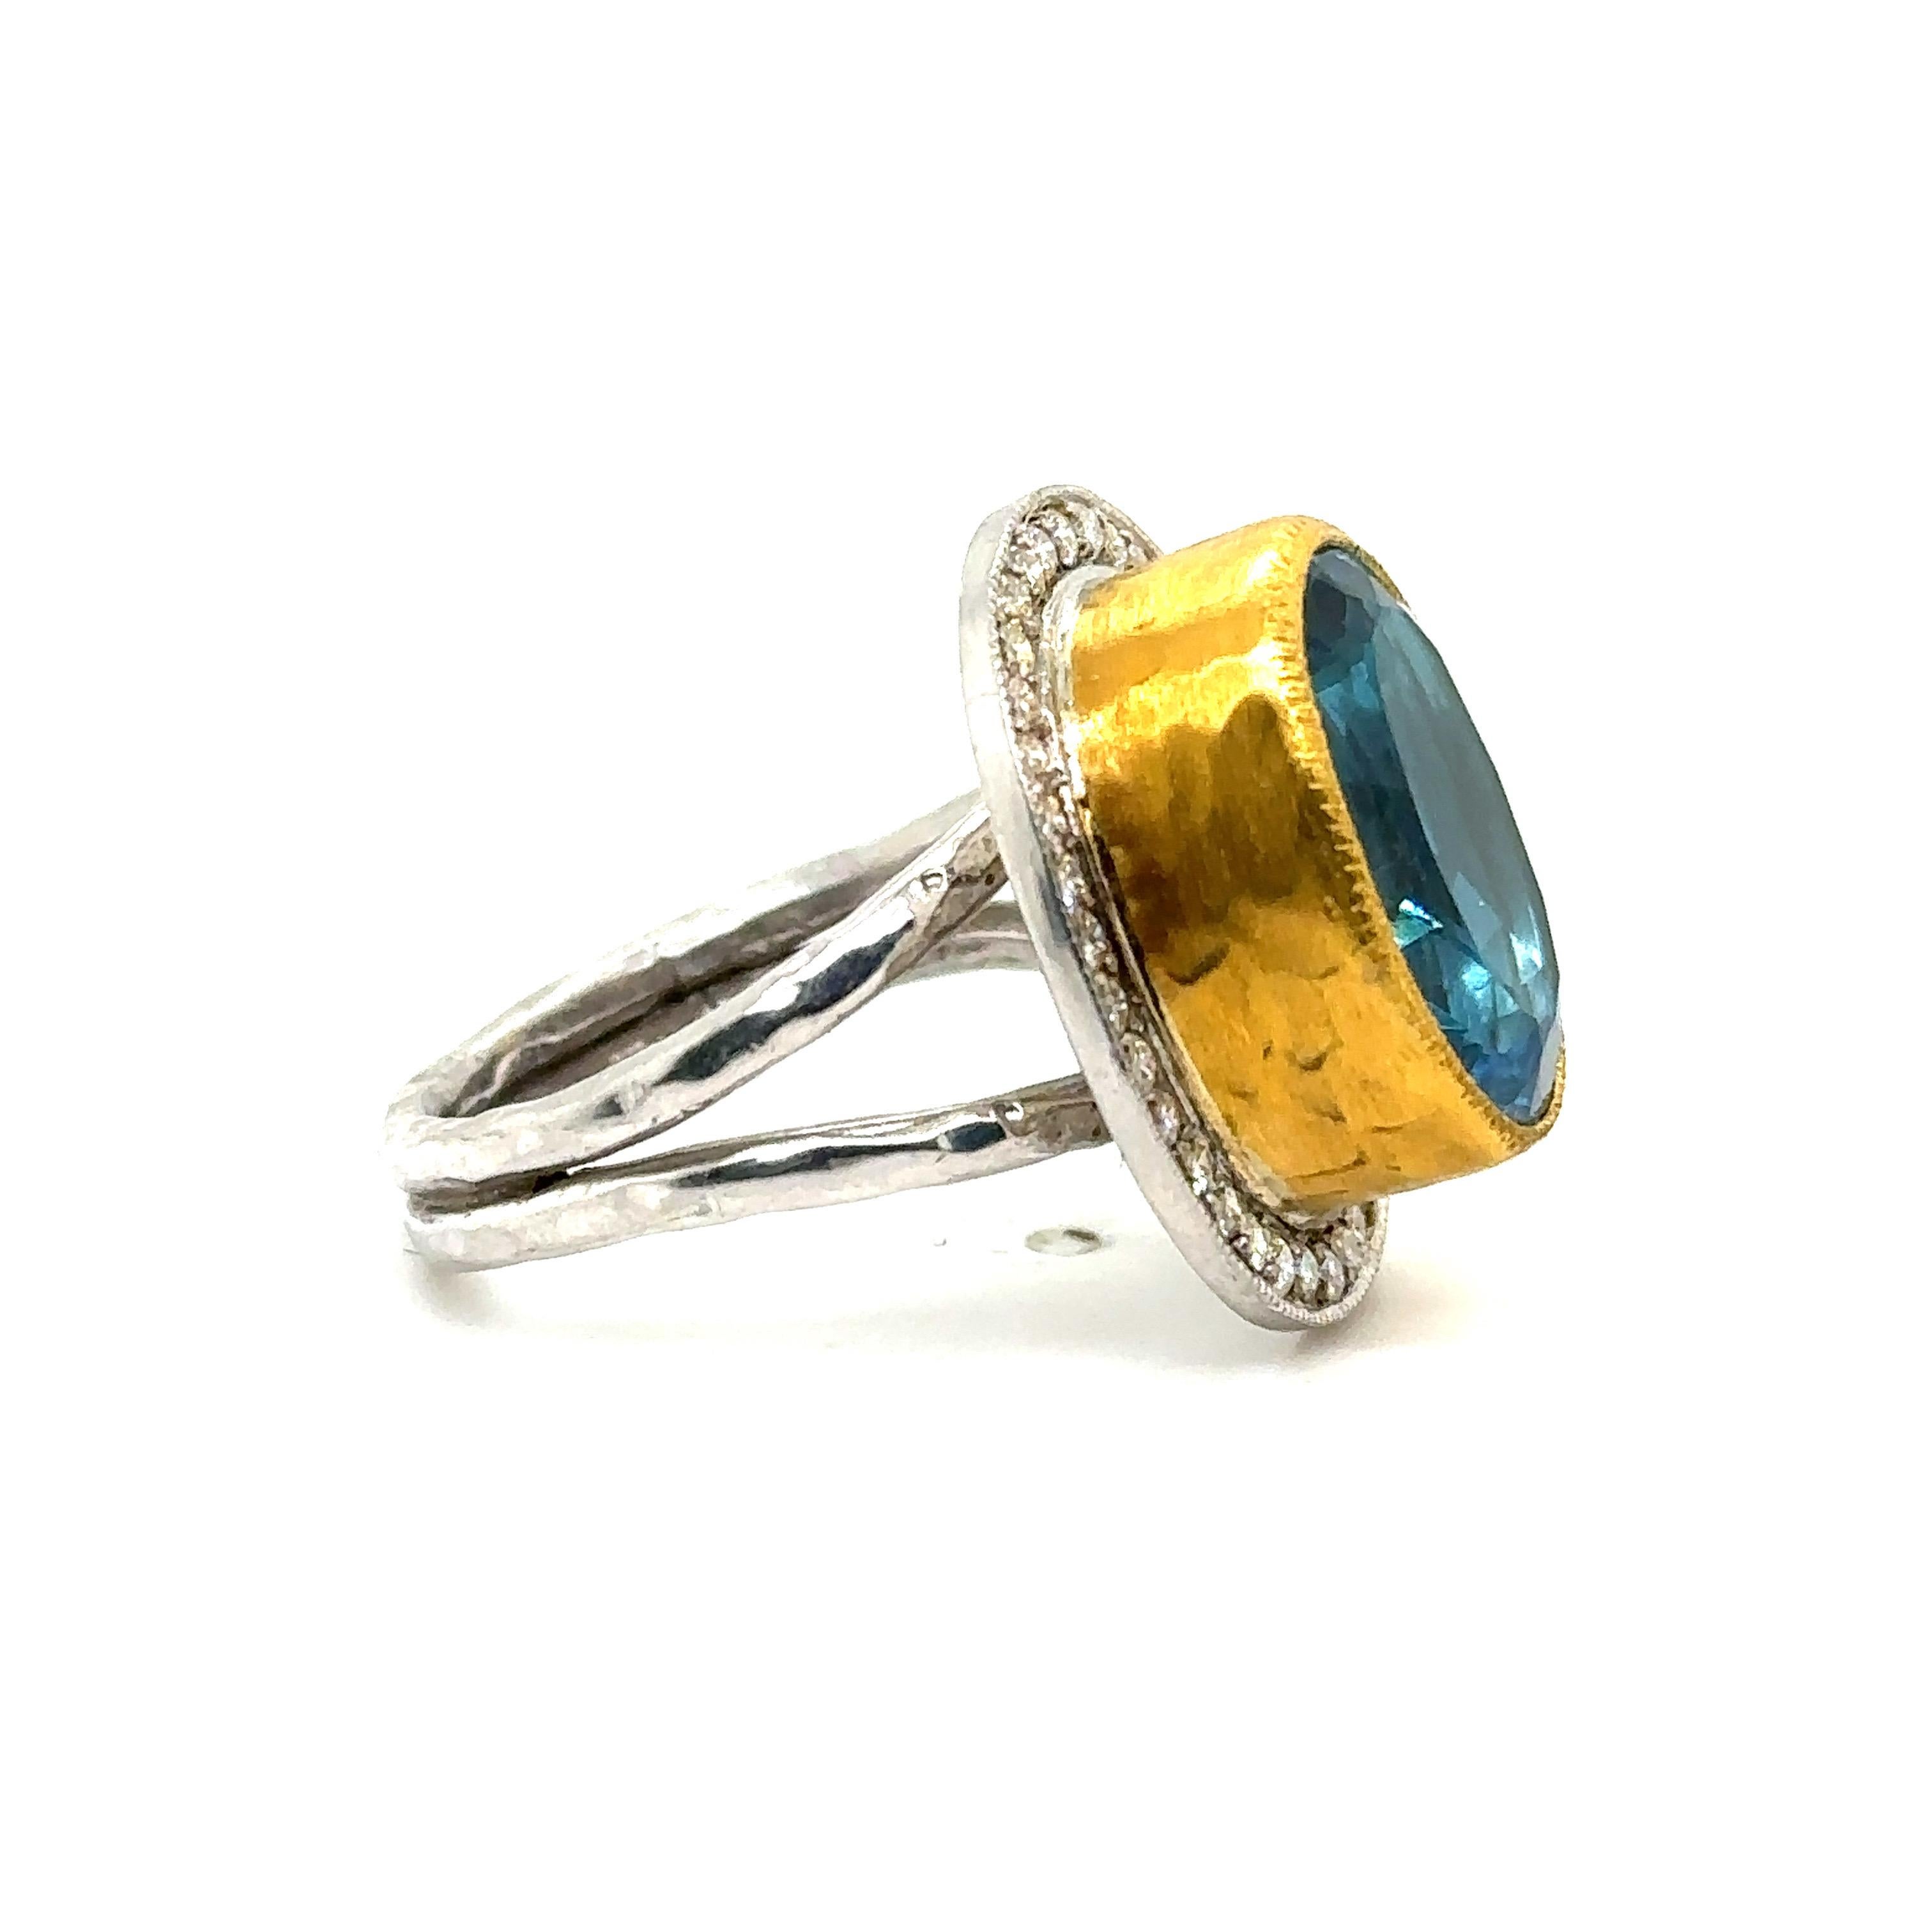 Women's JAS-22-305 - 24K GOLD/STERLING SILVER RING with DIAMONDS AND SWISS BLUE TOPAZ For Sale